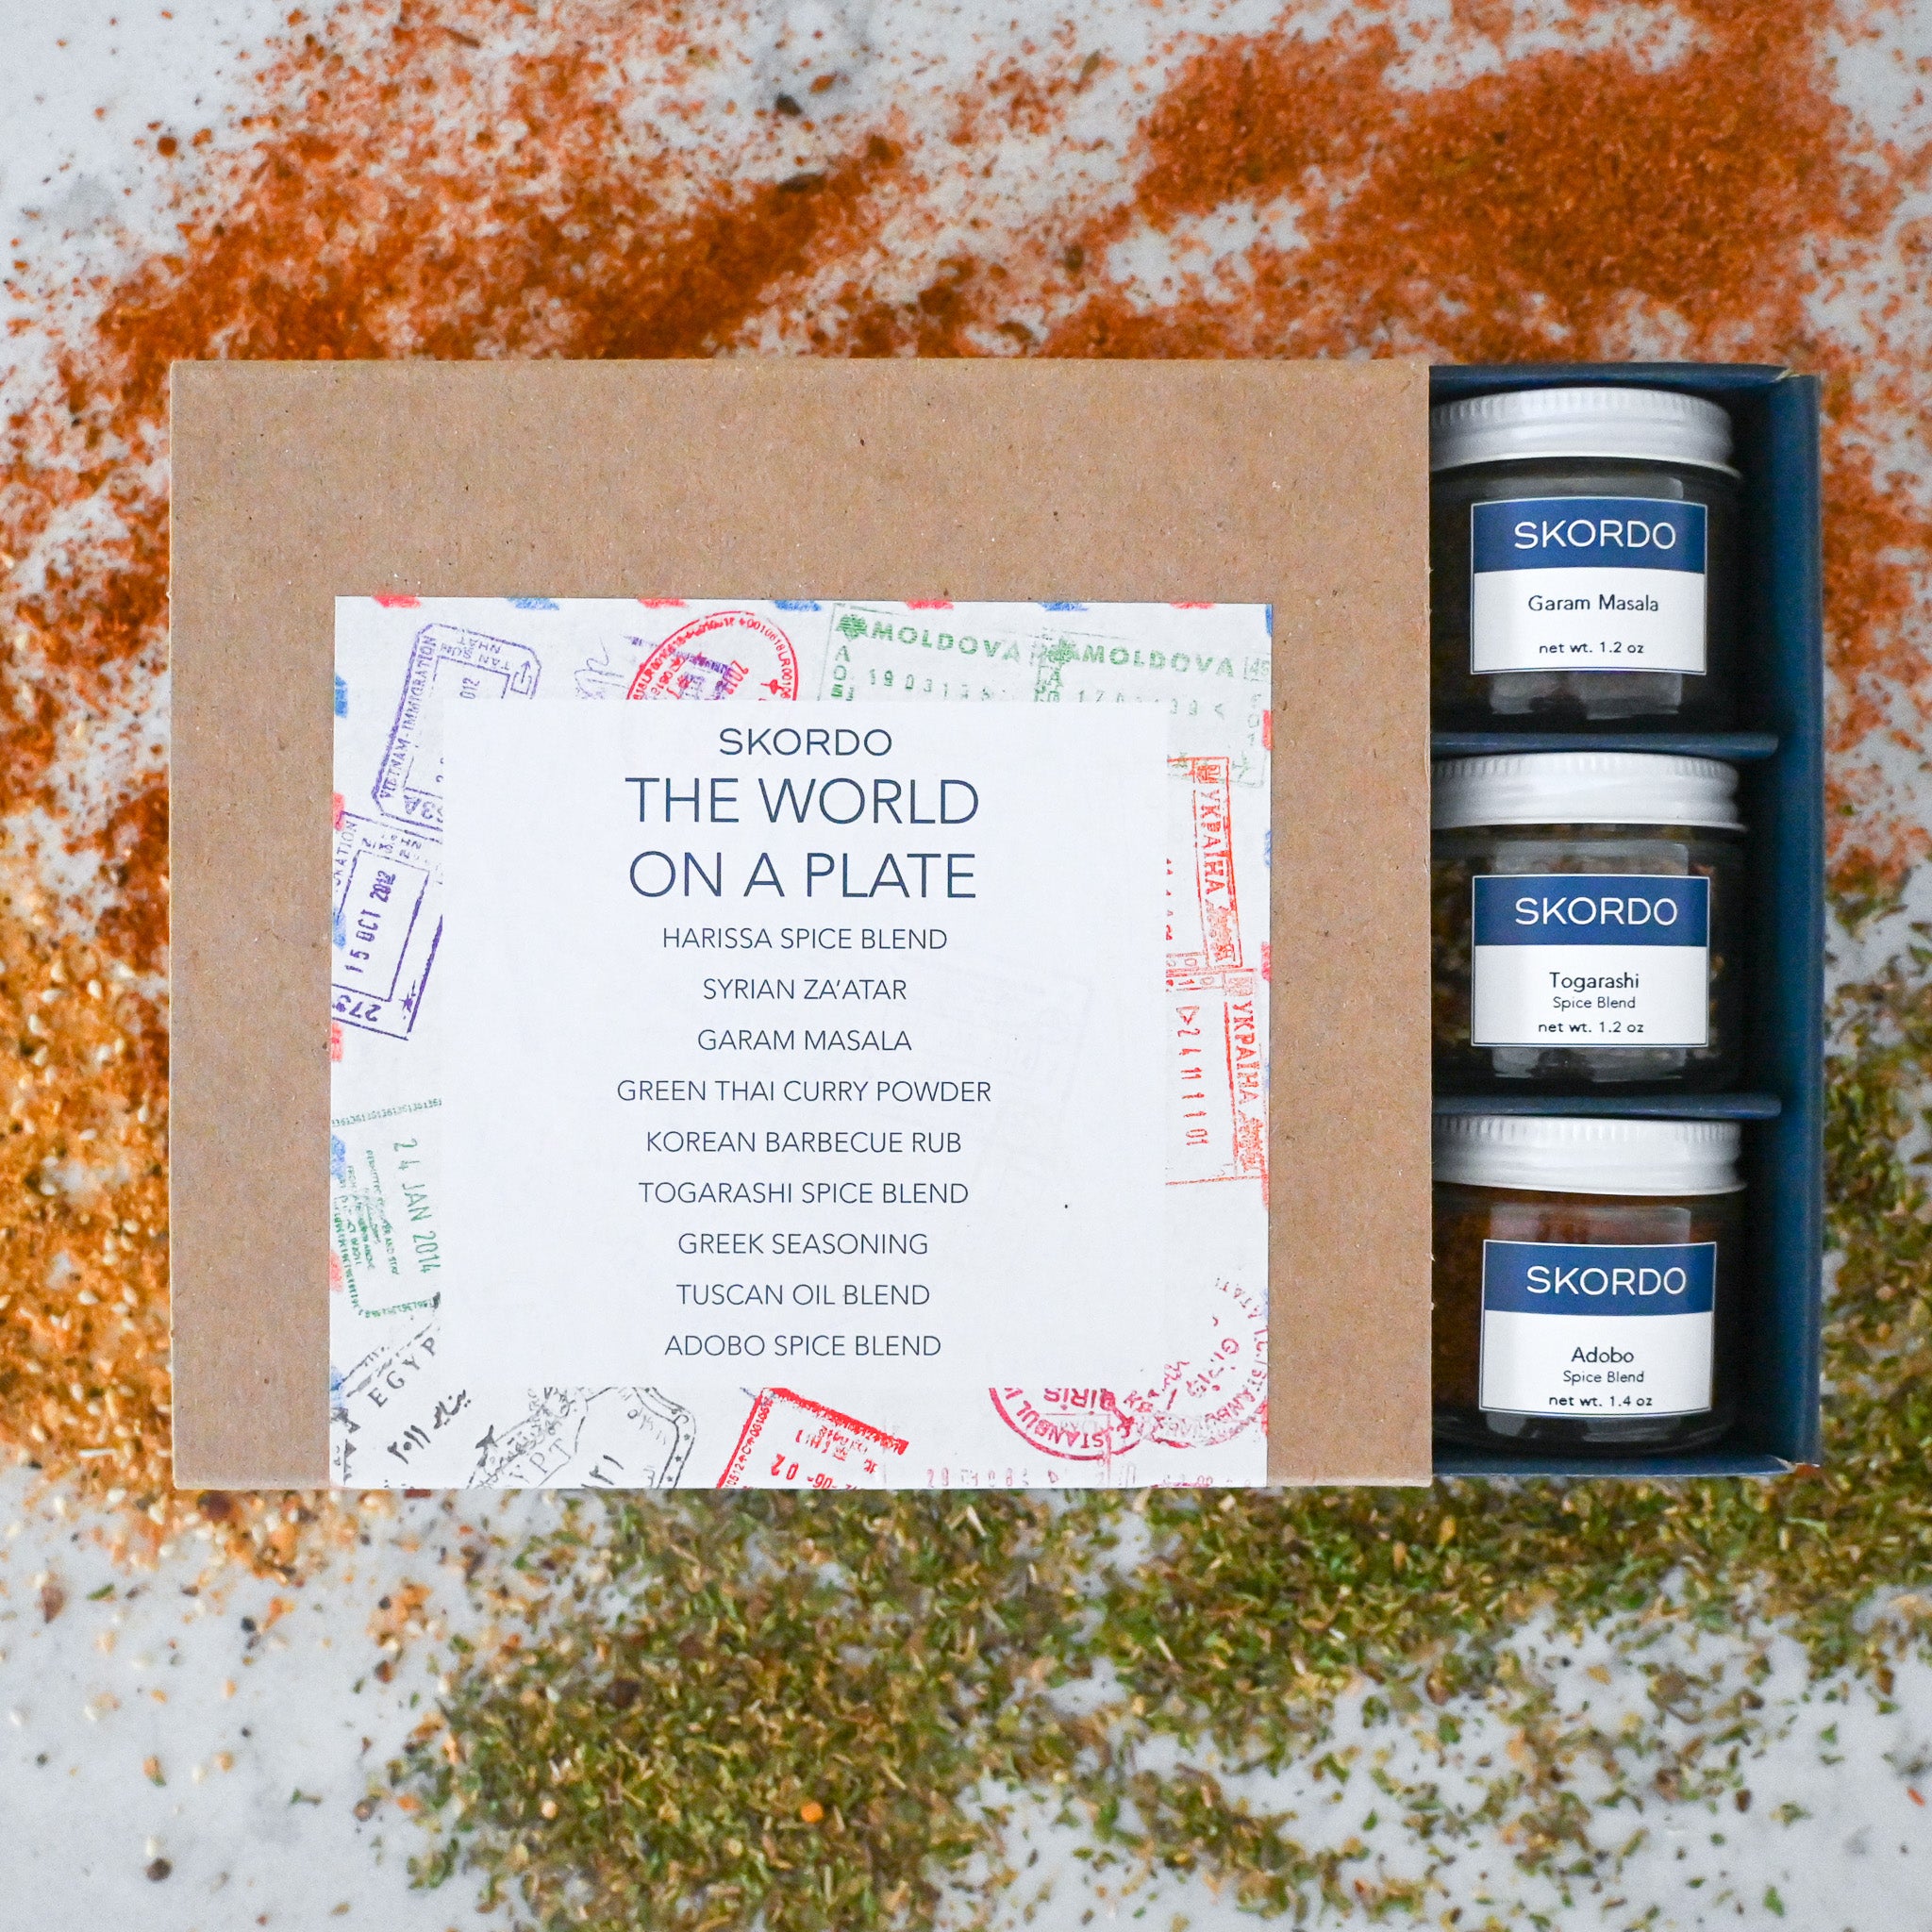 The Spices Kit - Sets of 9